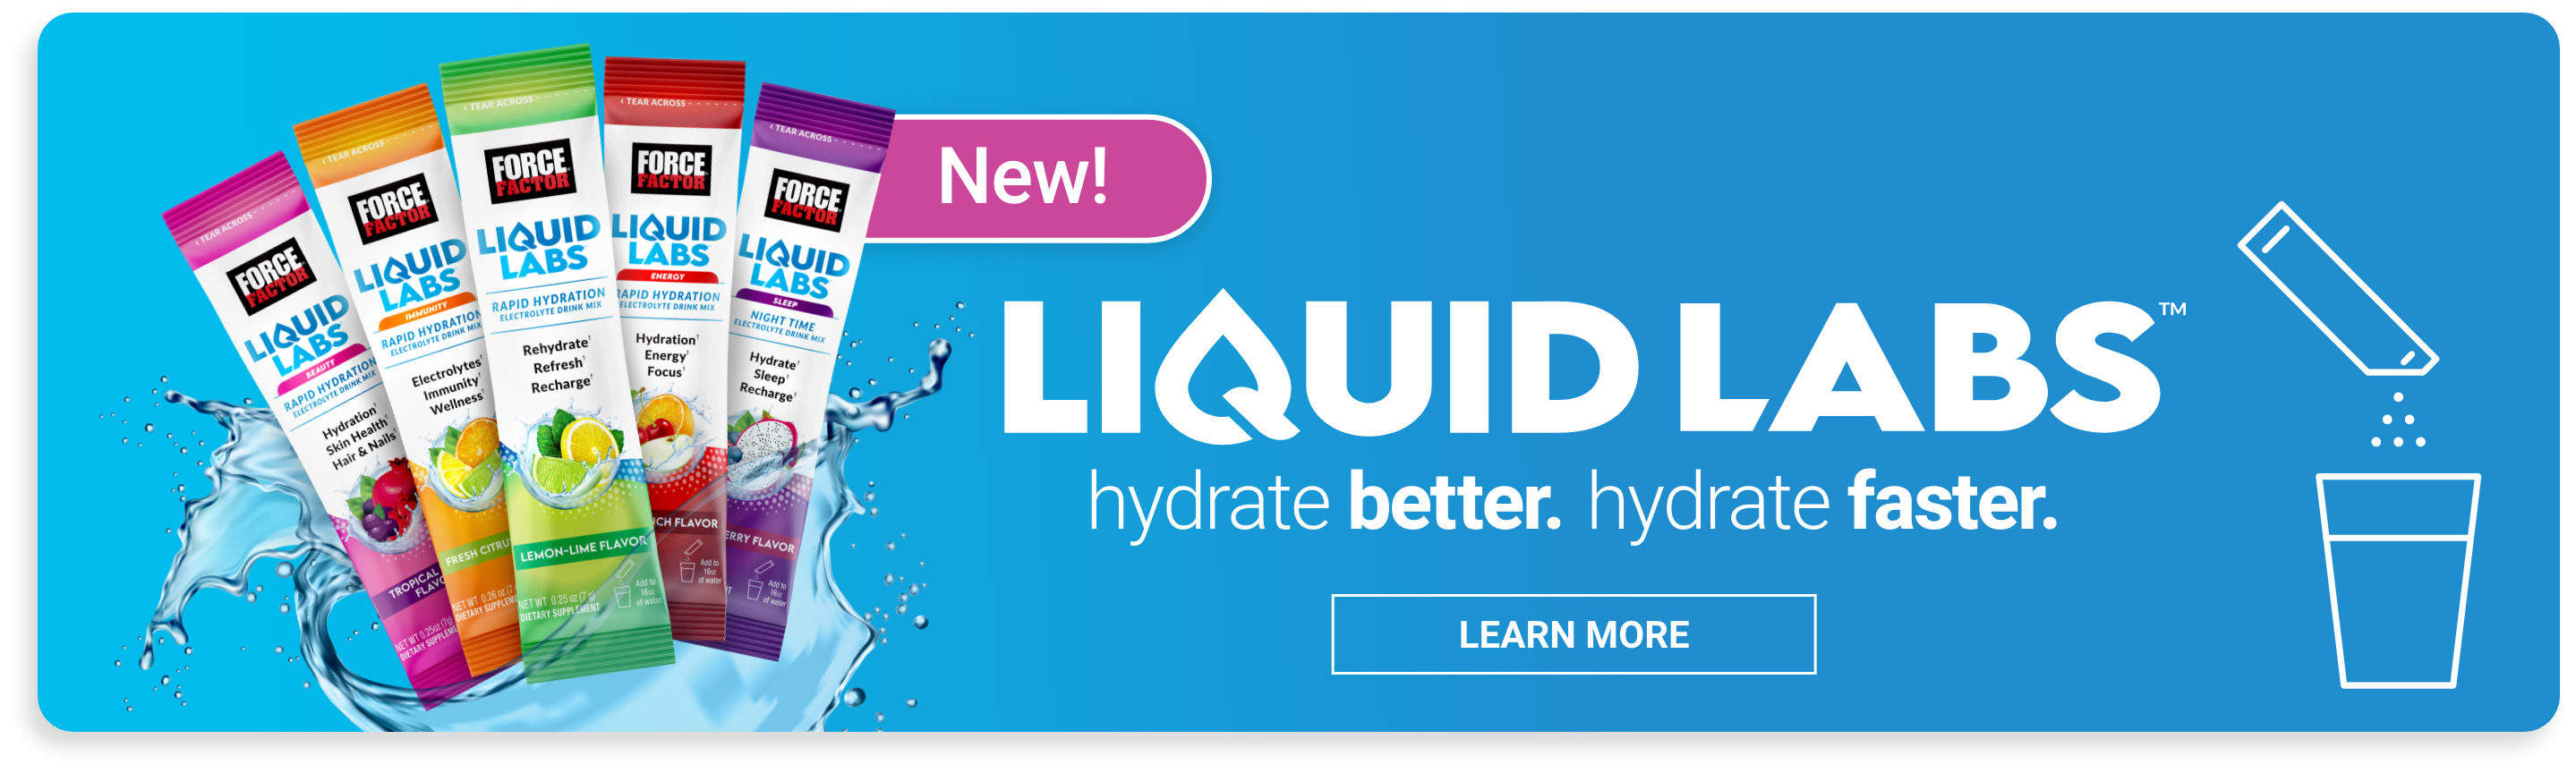 New! Liquid Labs - Learn More